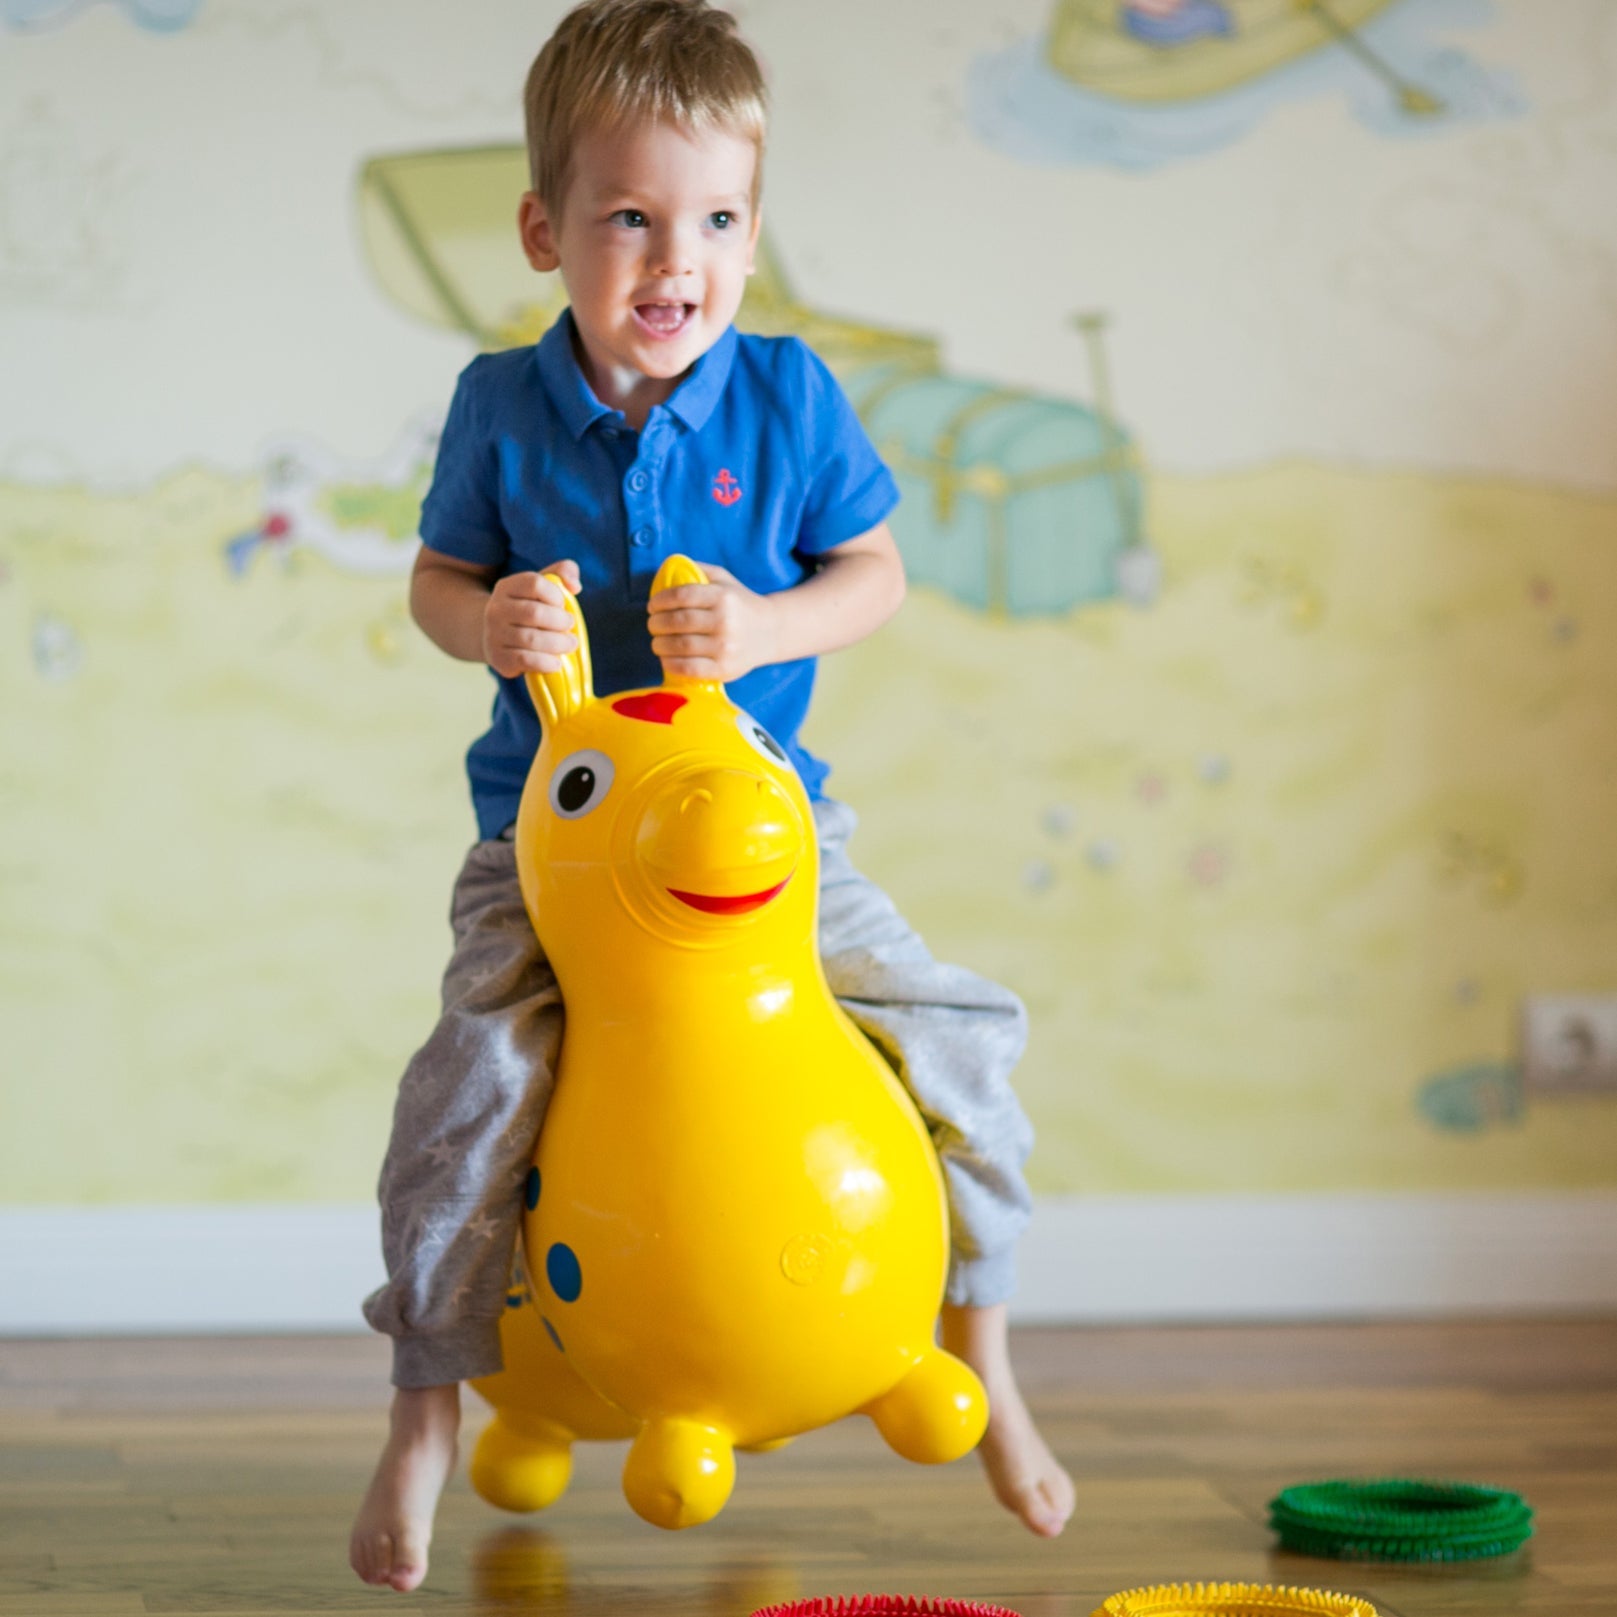 Child on Rody Bounce Horse